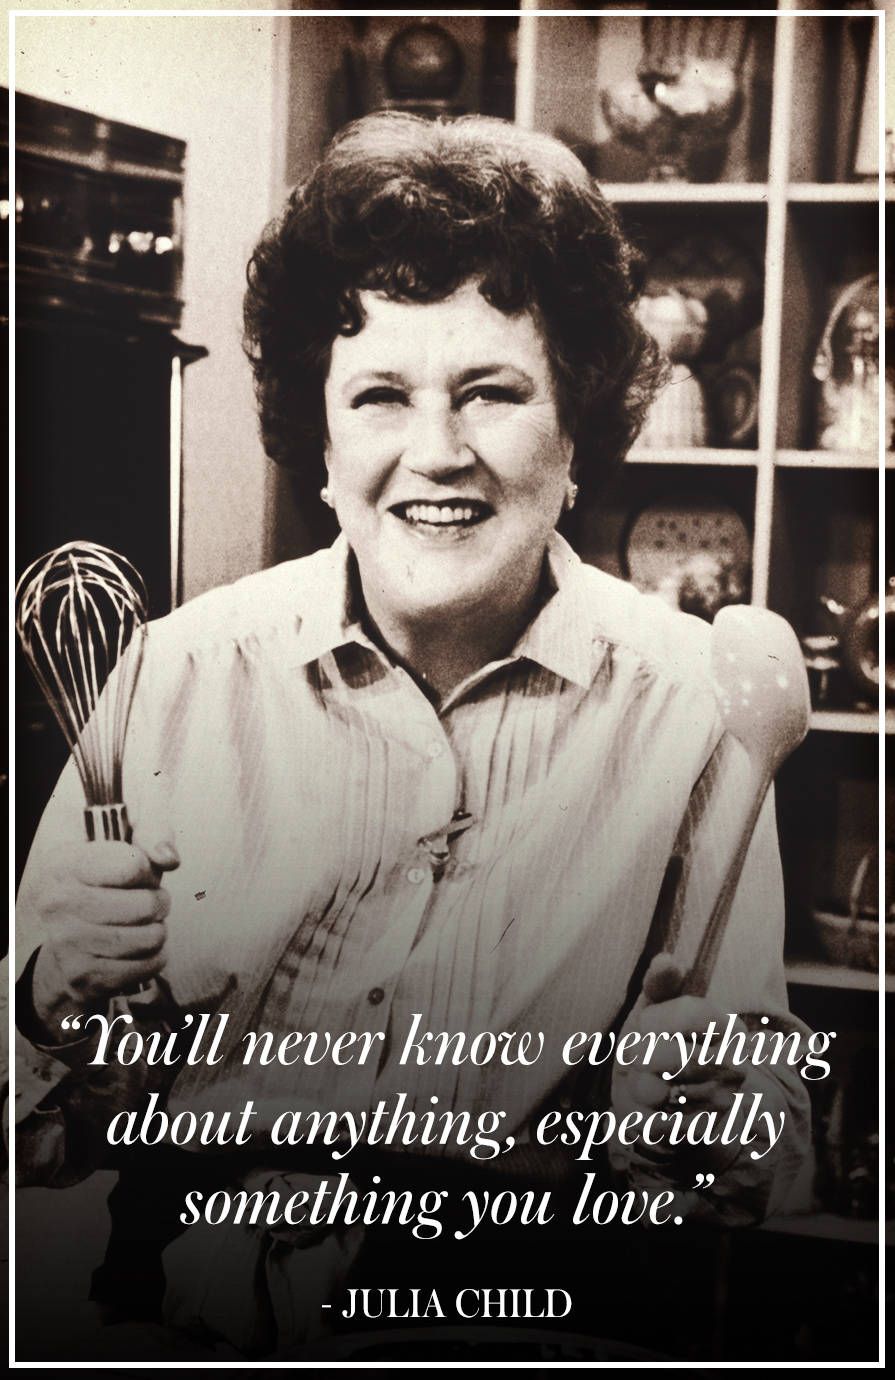 10 Best Julia Child Quotes - Great Julia Child Sayings About Life, Cooking,  and Butter